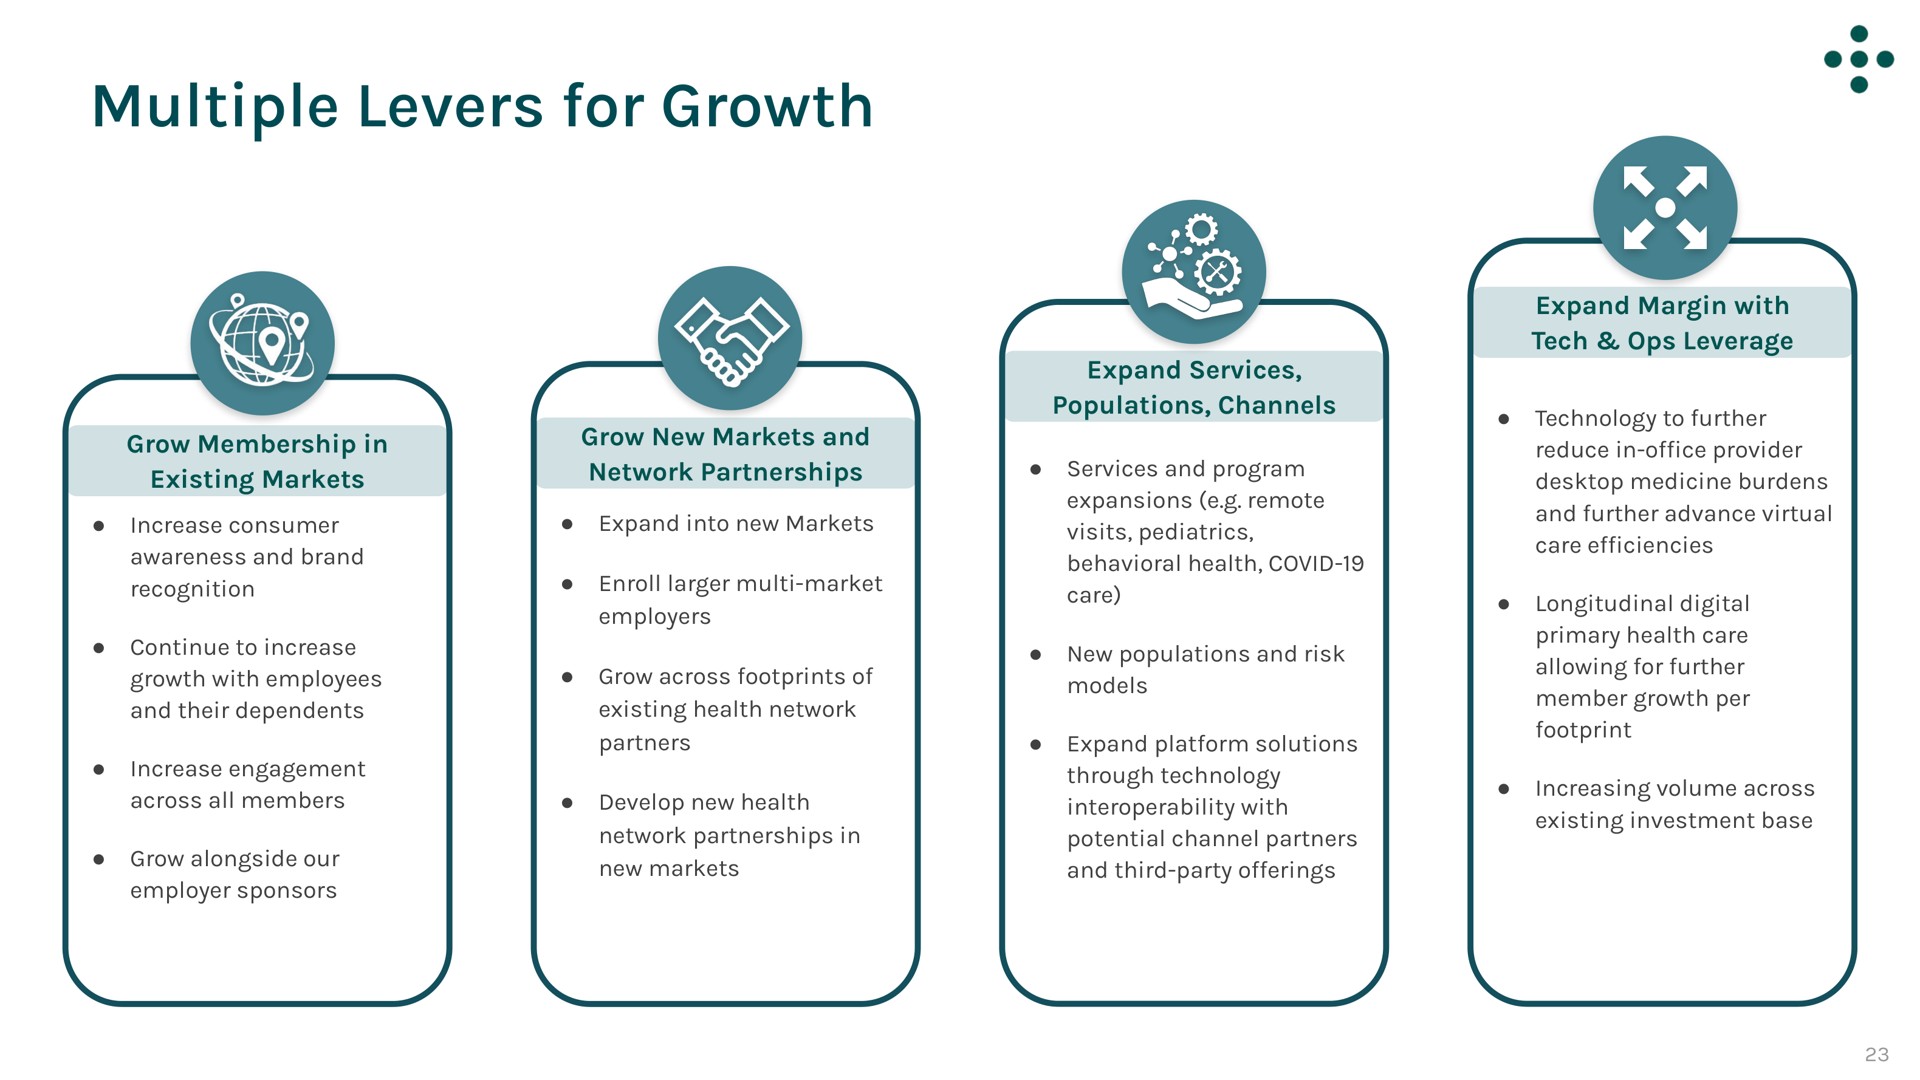 multiple levers for growth | One Medical